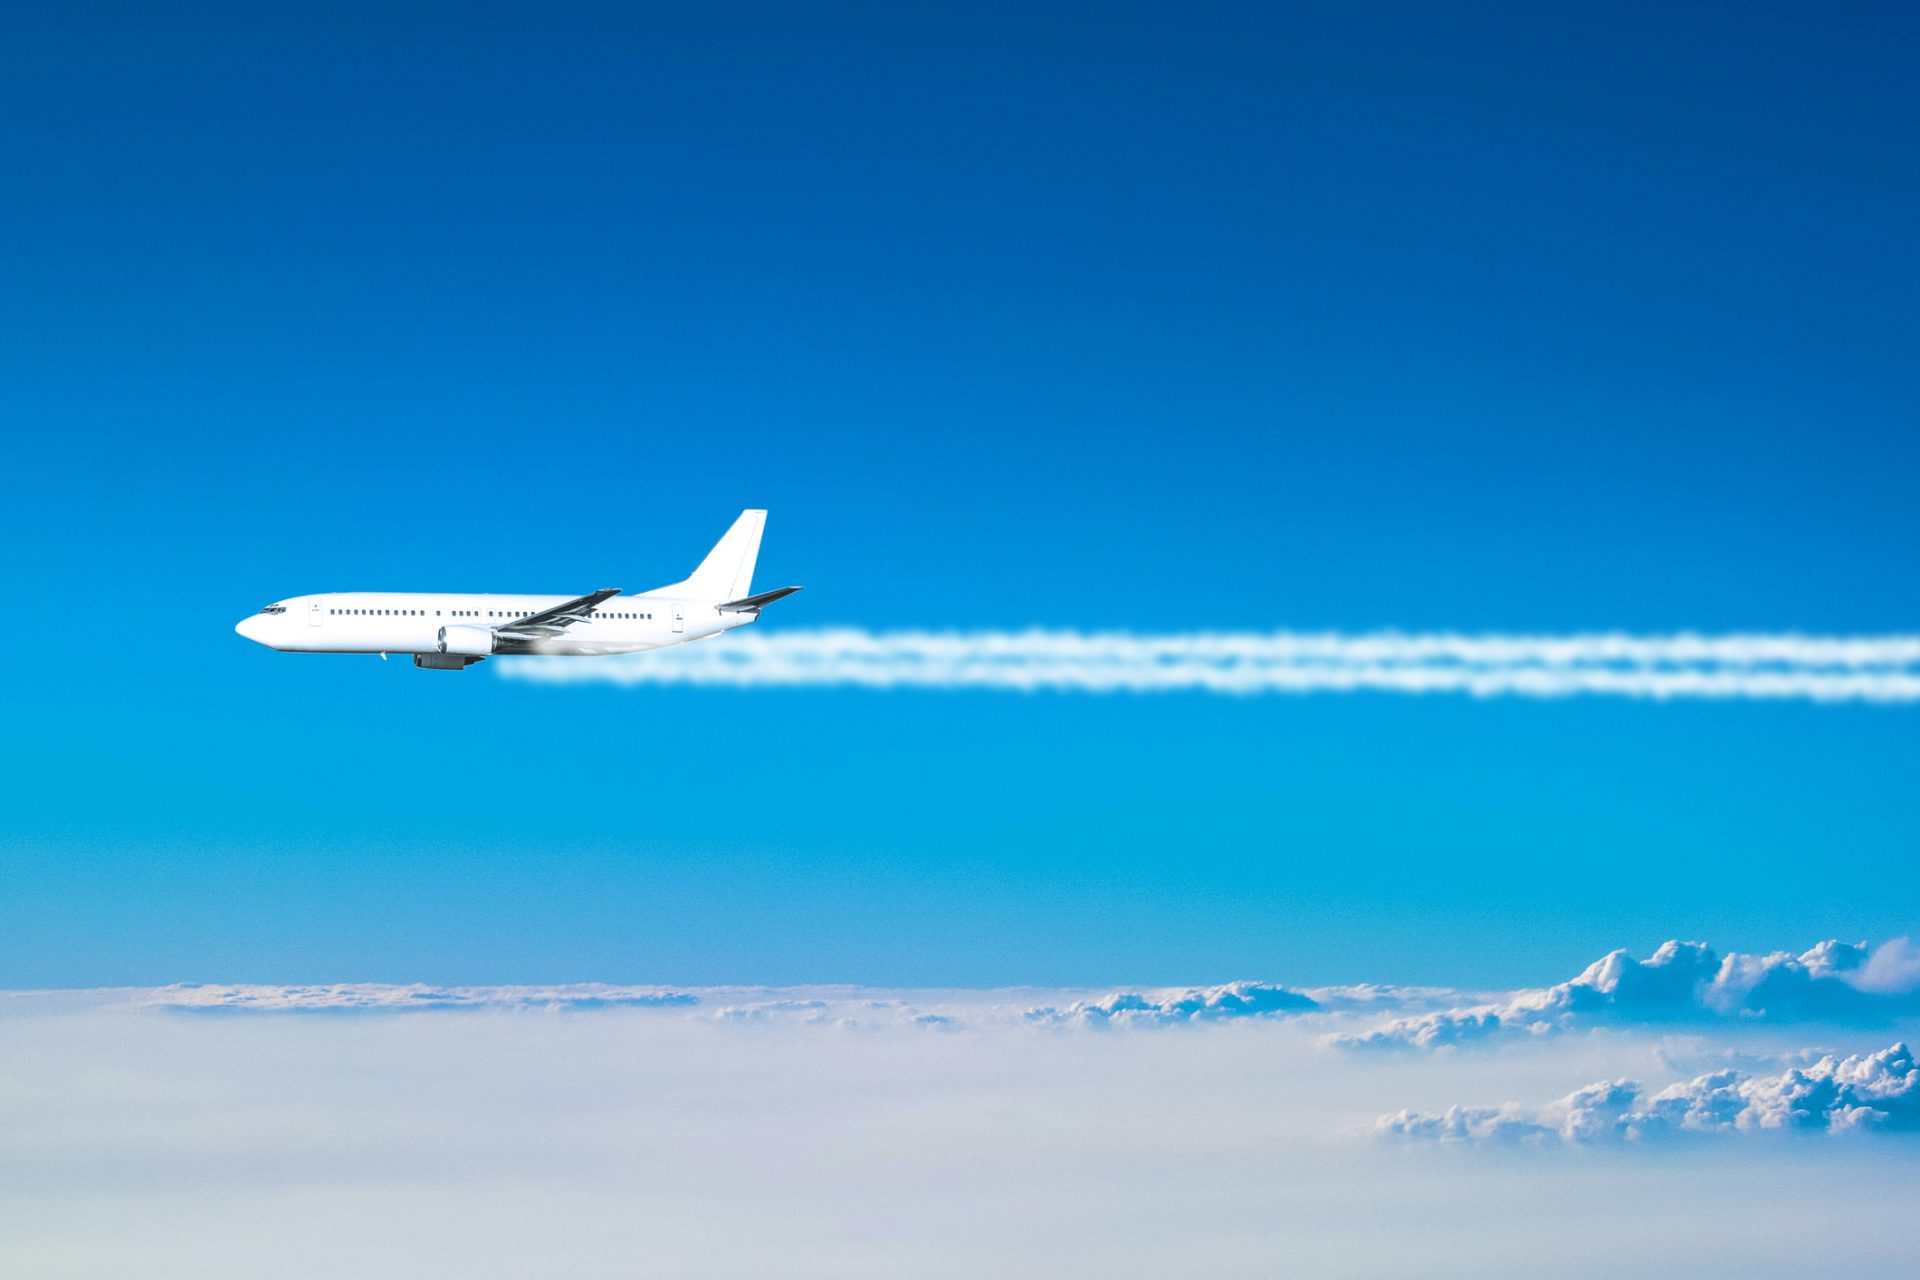 The aviation industry is under pressure to reduce carbon emission